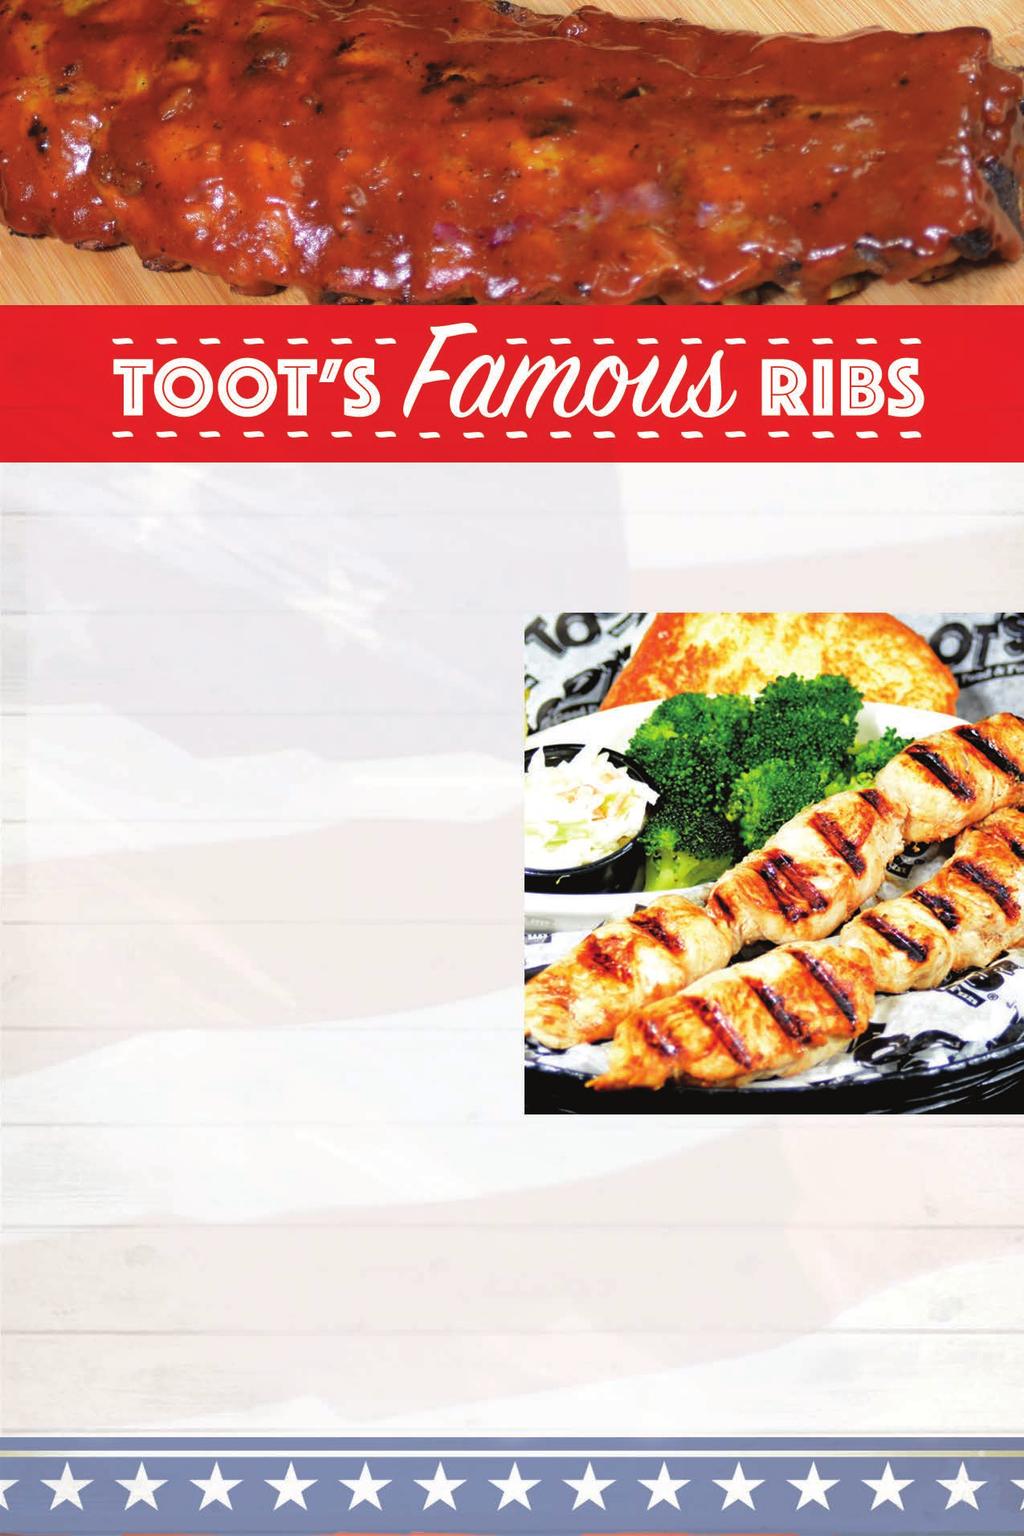 Toot s Danish Baby Back Ribs Served with Texas toast and your choice of one side. Add additional sides for only 2.